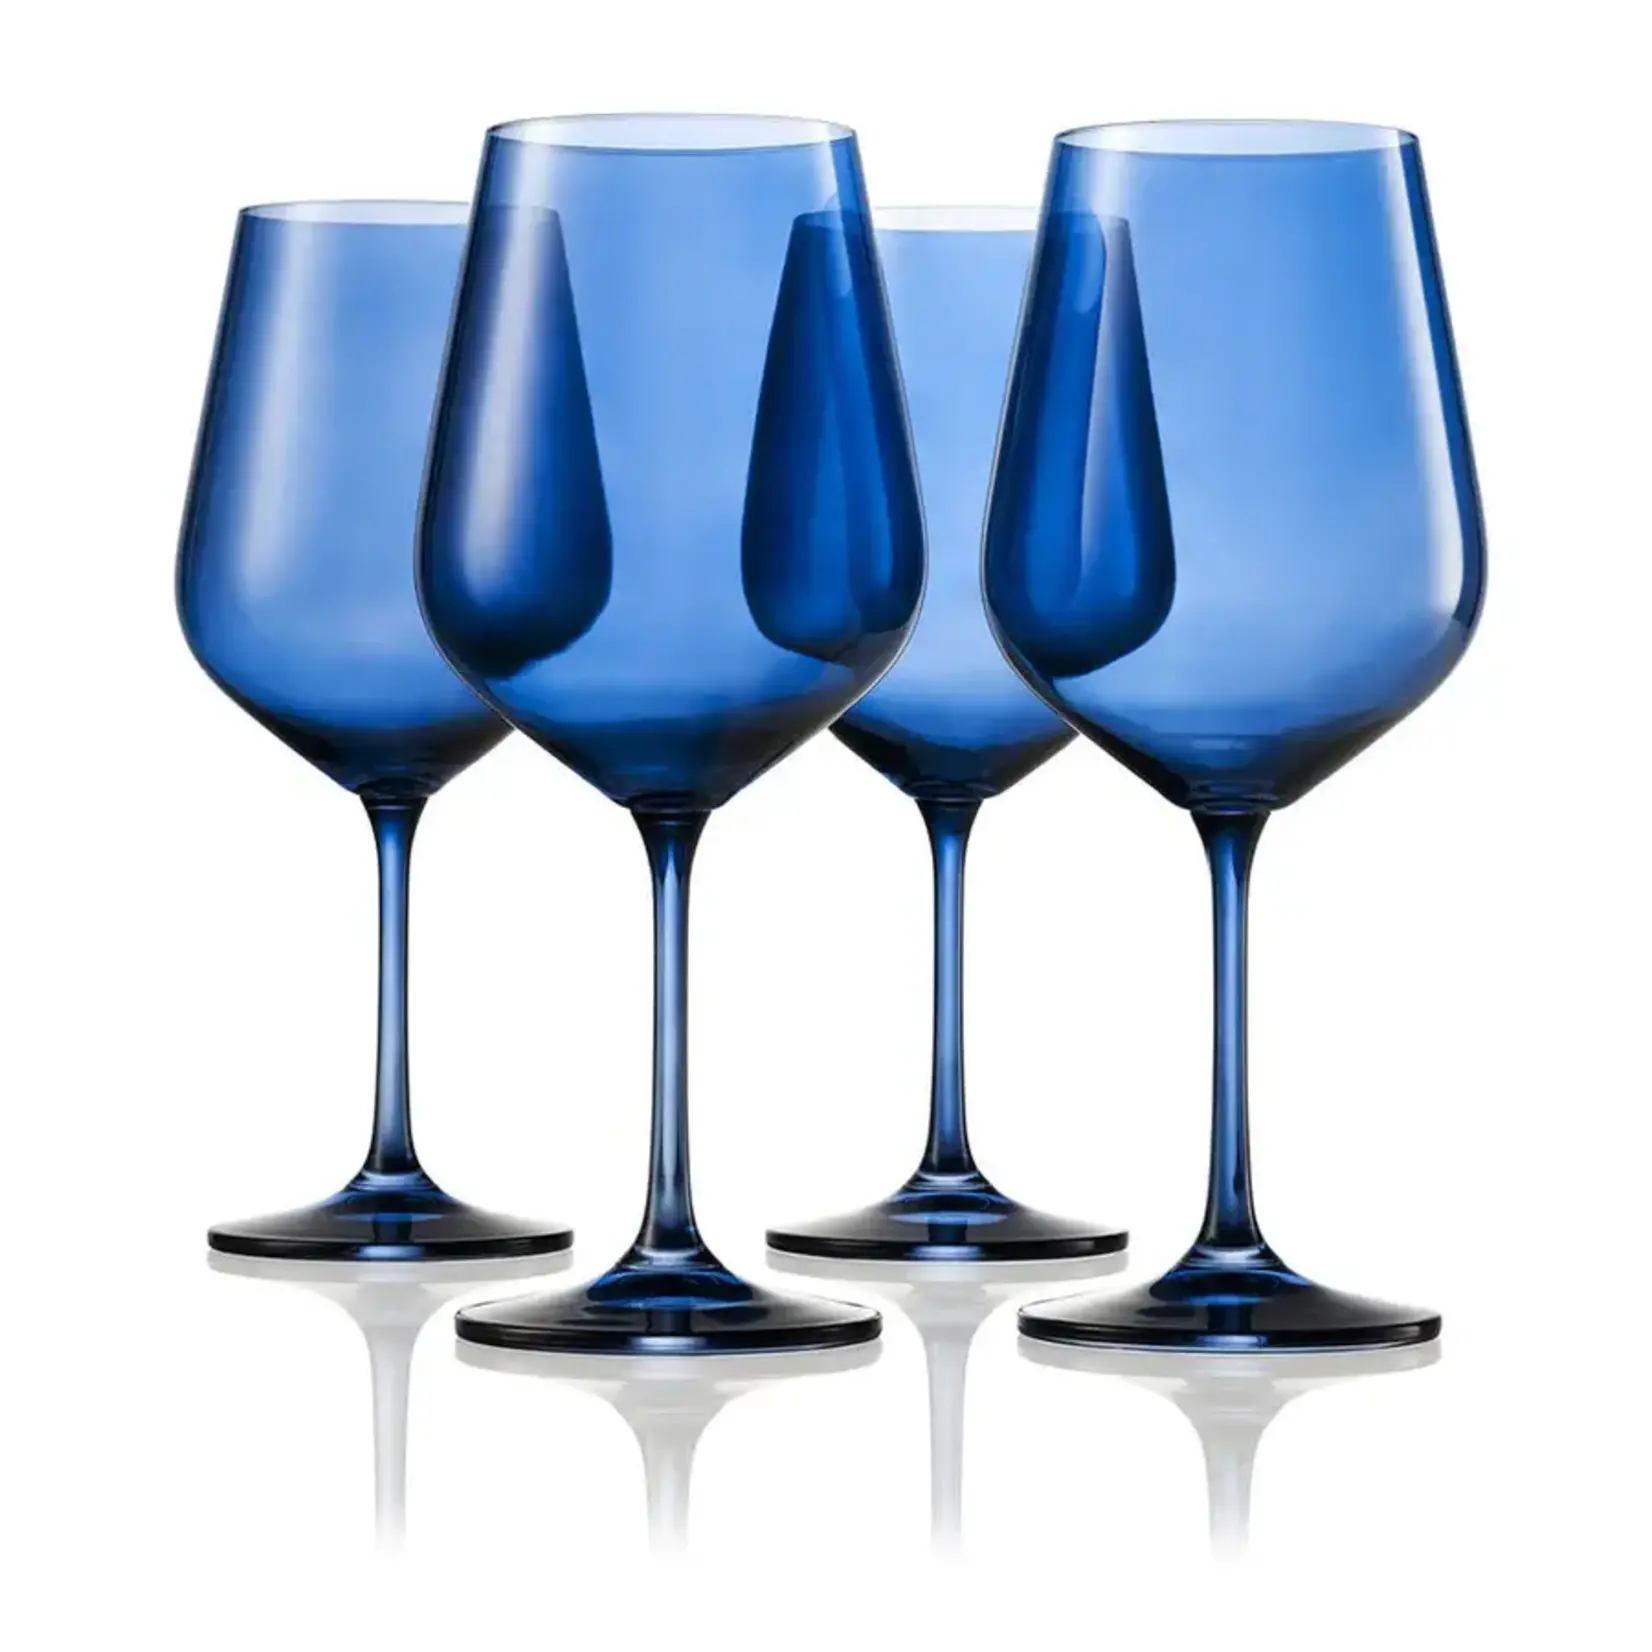 Sheer Blue Red Wine Glass - Set of 4